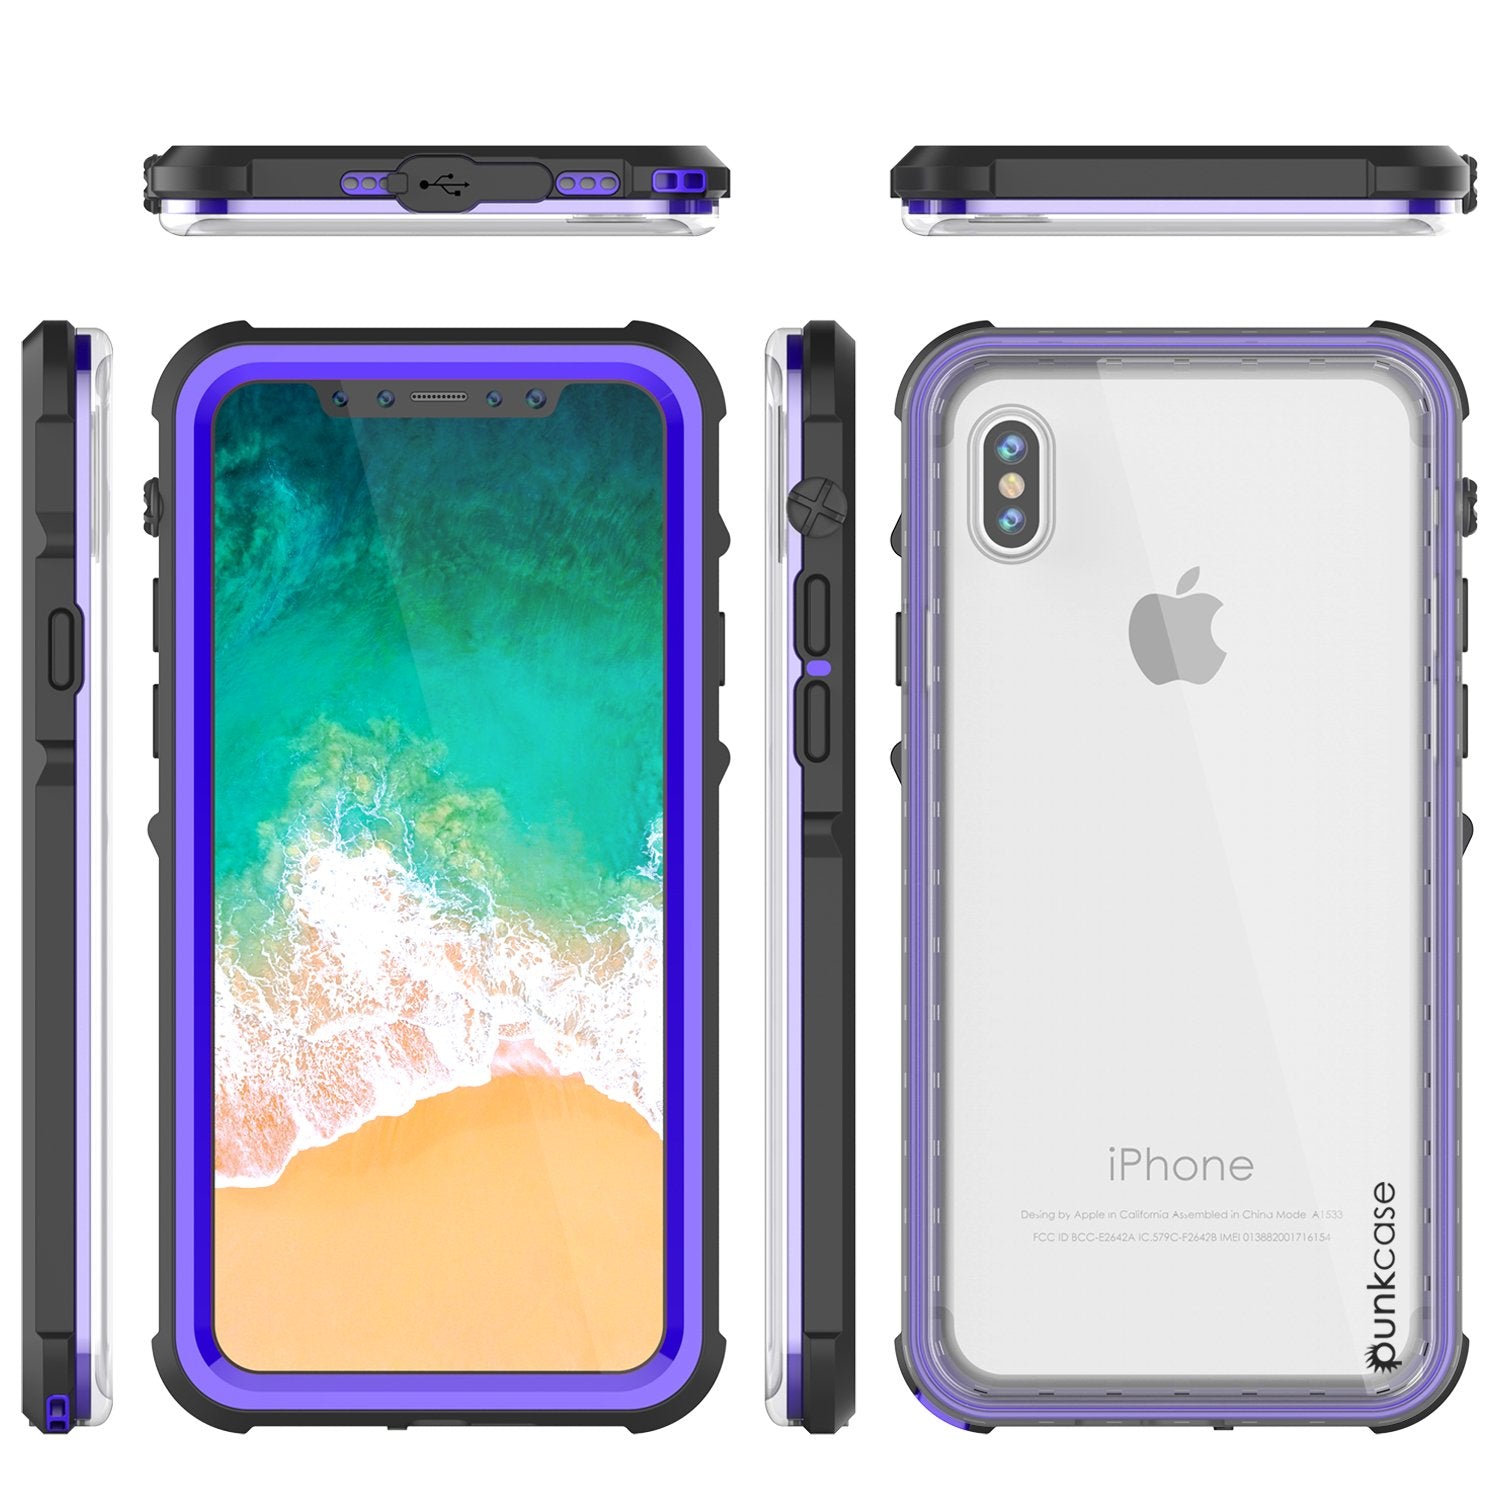 iPhone X Case, PUNKCase [CRYSTAL SERIES] Protective IP68 Certified Cover W/ Attached Screen Protector - DustPROOF, ShockPROOF, SnowPROOF - Ultra Slim Fit for Apple iPhone 10 [PURPLE]